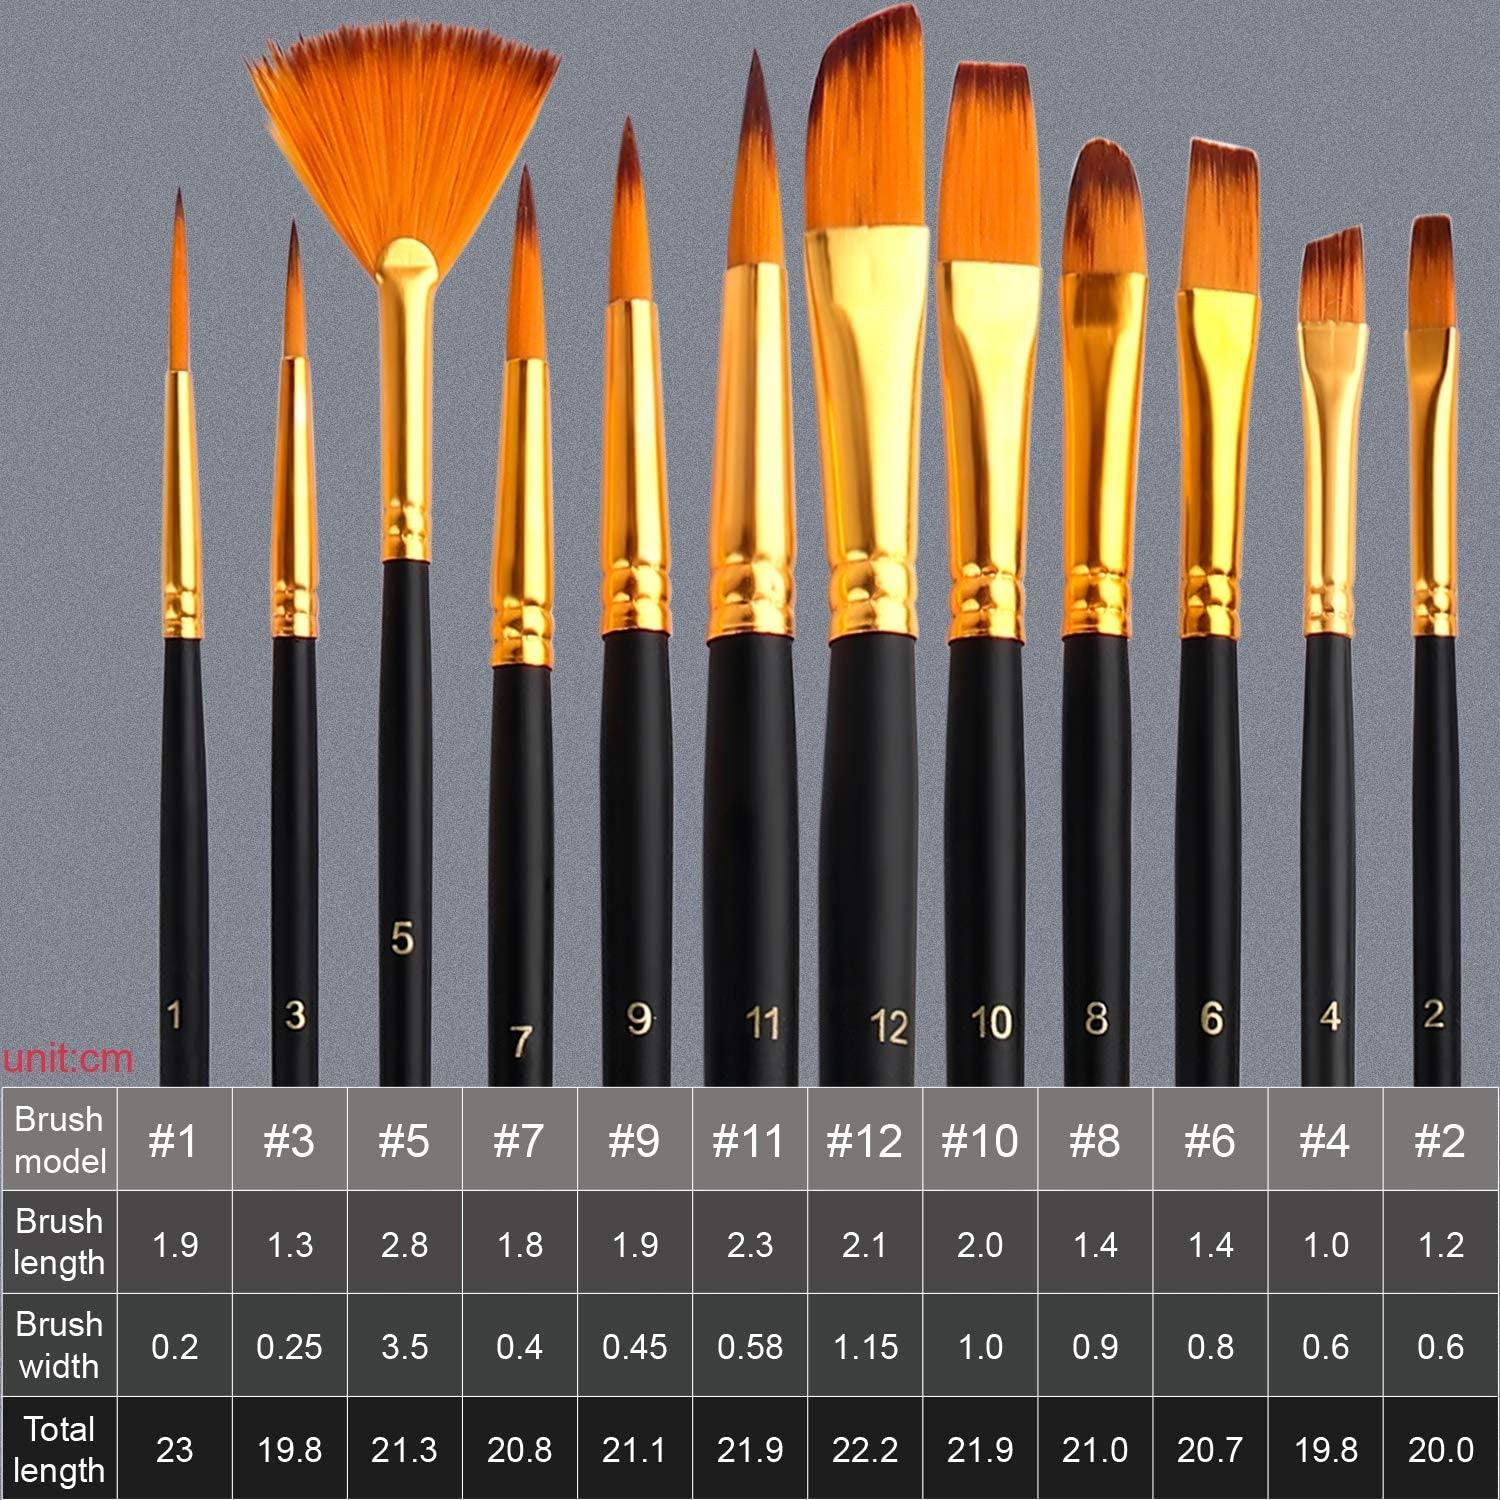 6pcs Painting Canvas Set With Easel Stand, Oil Paints, Brushes And Other  Painting Tools For Diy Art